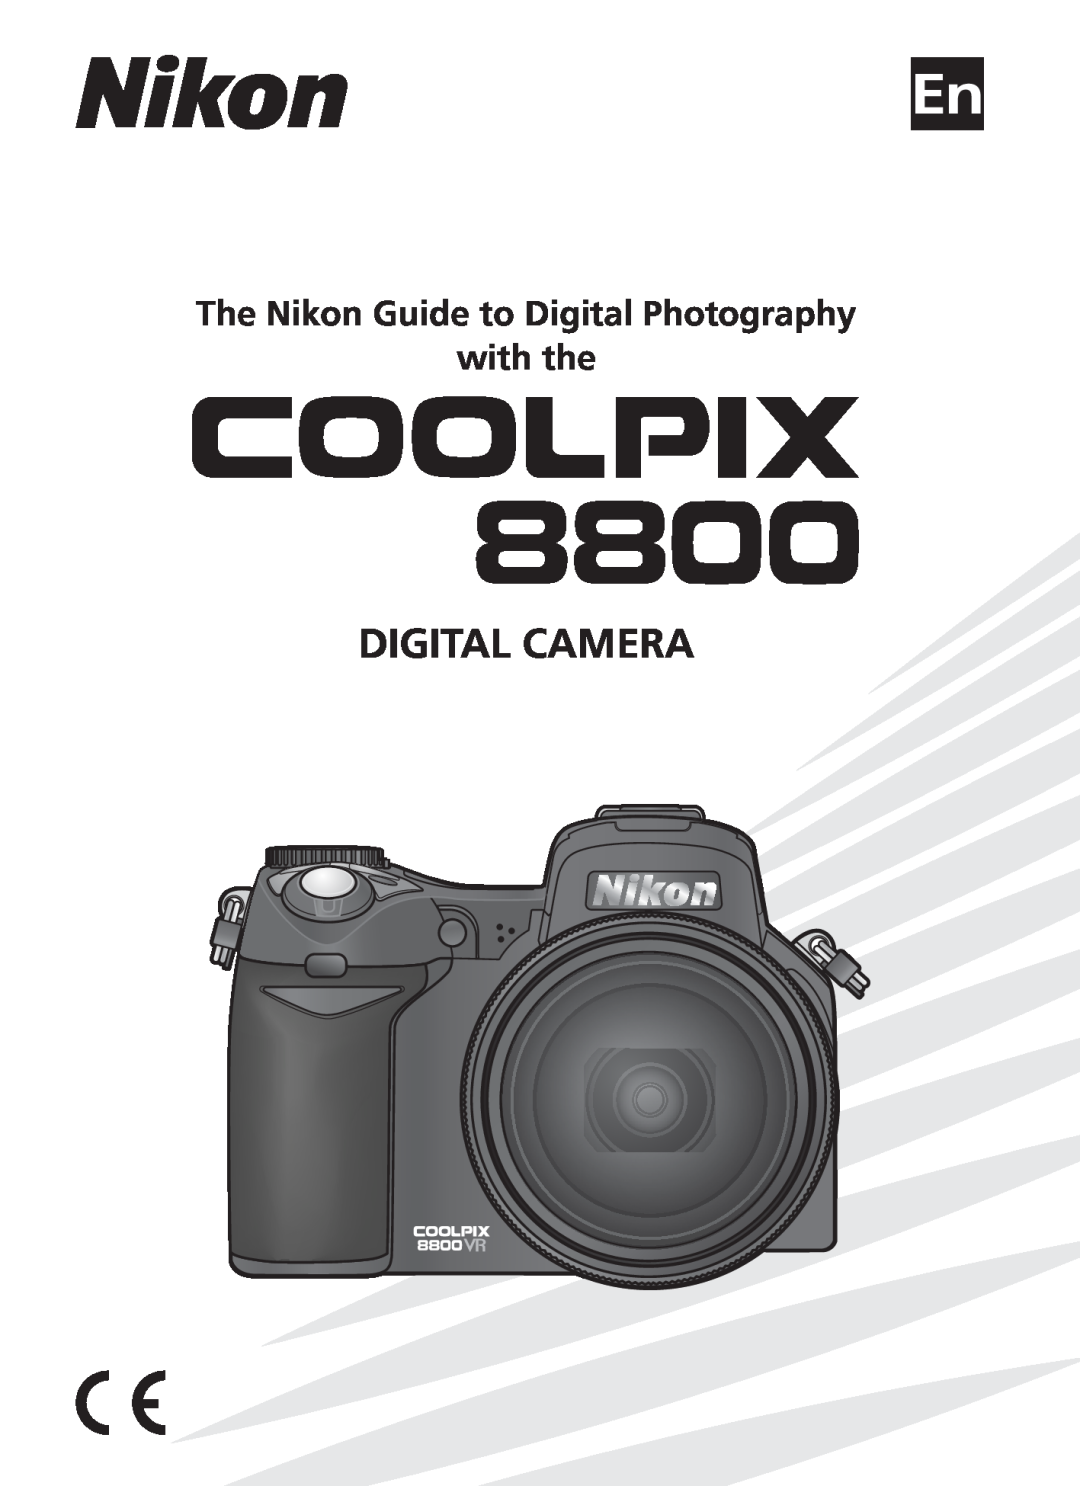 Nikon COOLPIX8800 manual Digital Camera, The Nikon Guide to Digital Photography with the 